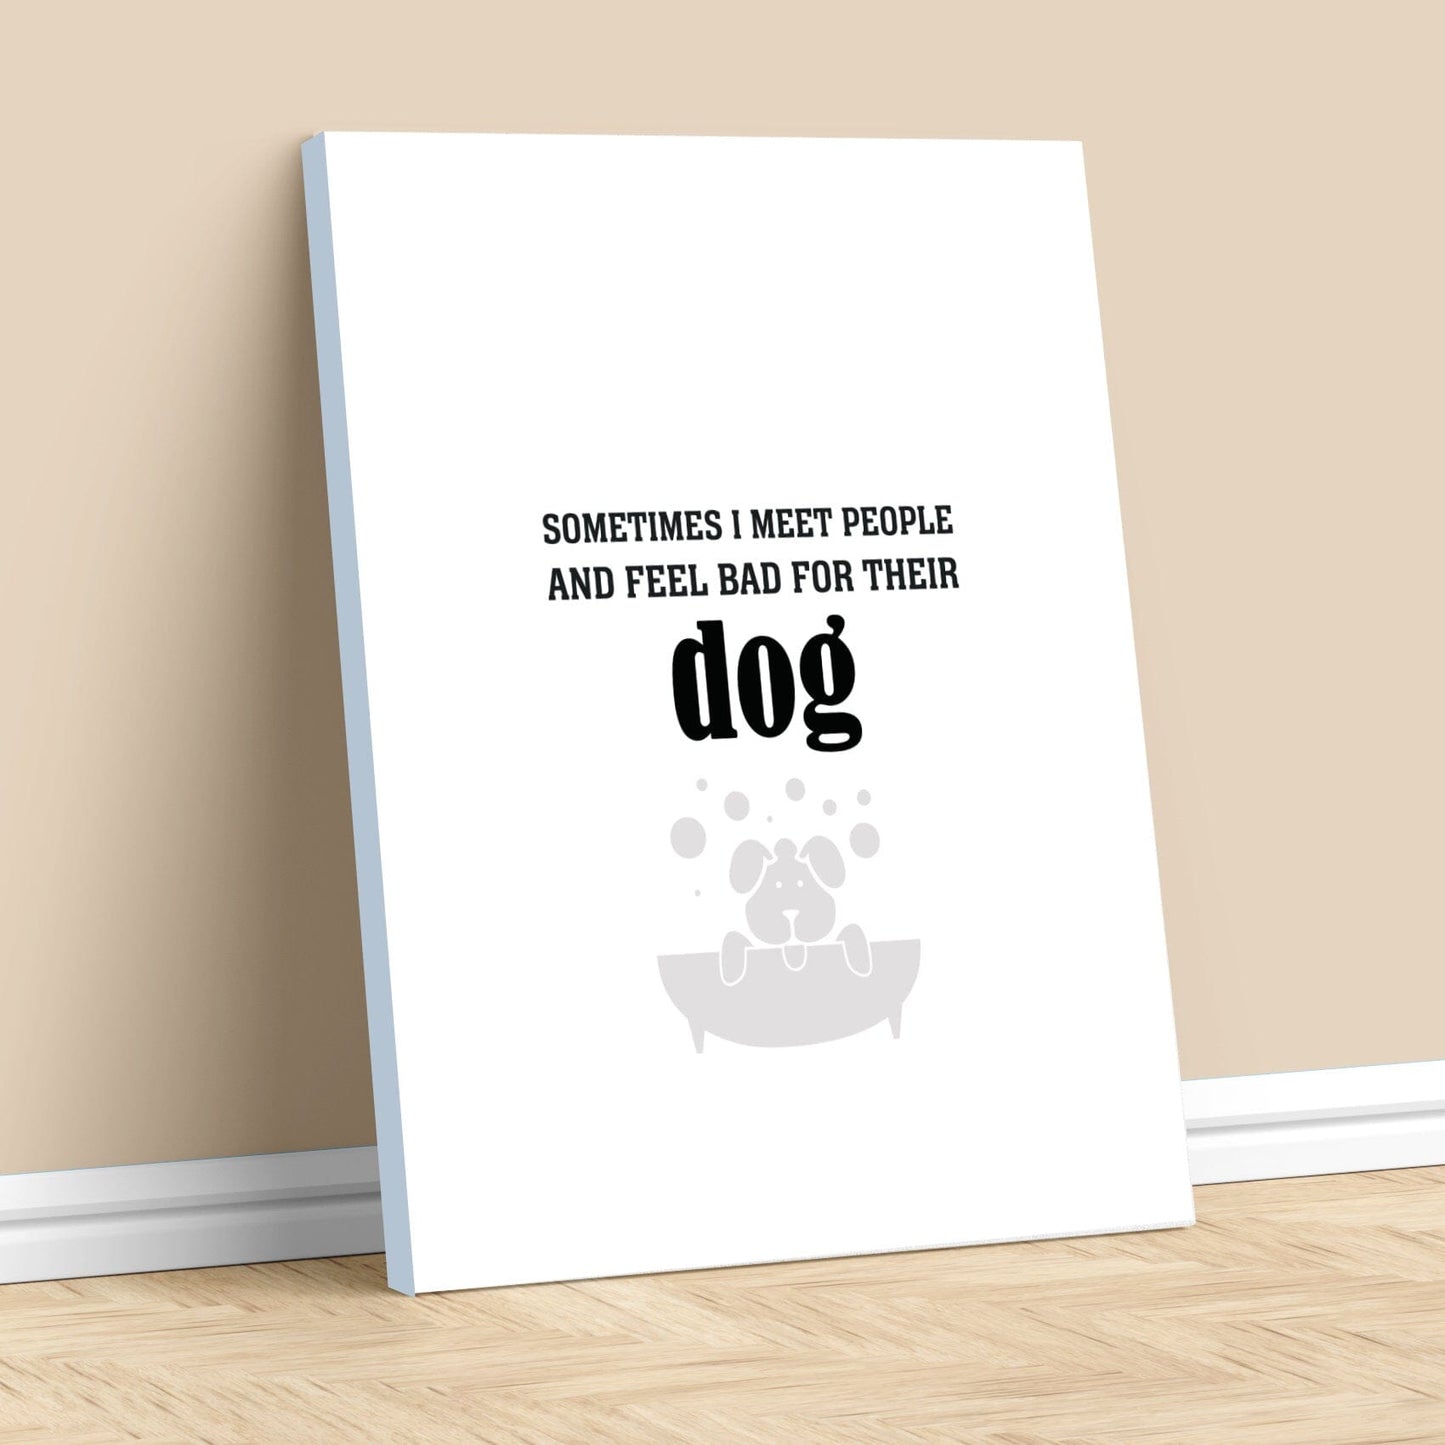 Sometimes I Meet People and Feel Bad for Their Dog Print Wise and Wiseass Quotes Song Lyrics Art 11x14 Canvas Wrap 